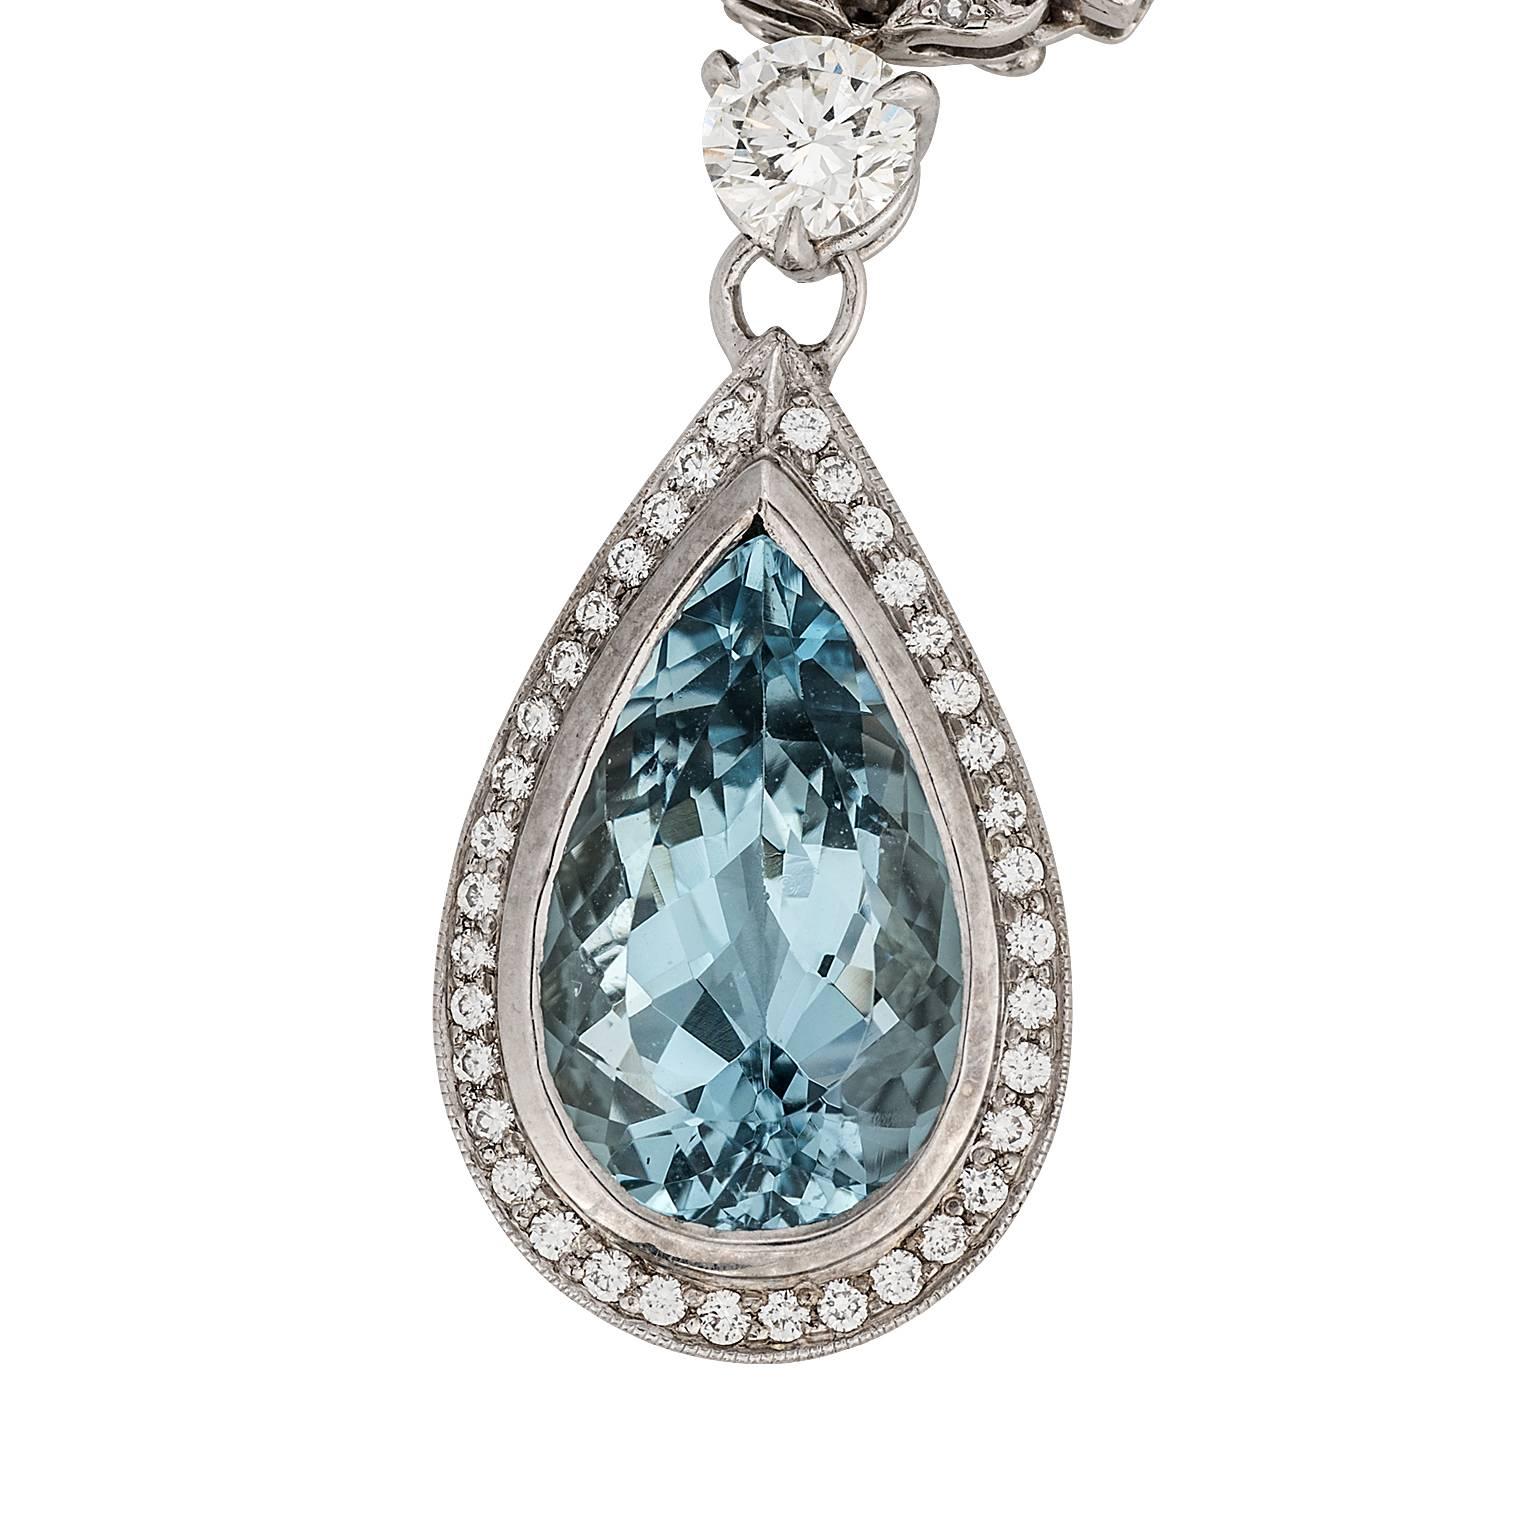 4.41 carat pear shape aquamarine and diamond 18 karat white gold pendant necklace.  The aquamarine is bezel set with a single row of round brilliant diamonds  surrounding, suspended from a 0.50 carat round brilliant diamond.  The pendant is